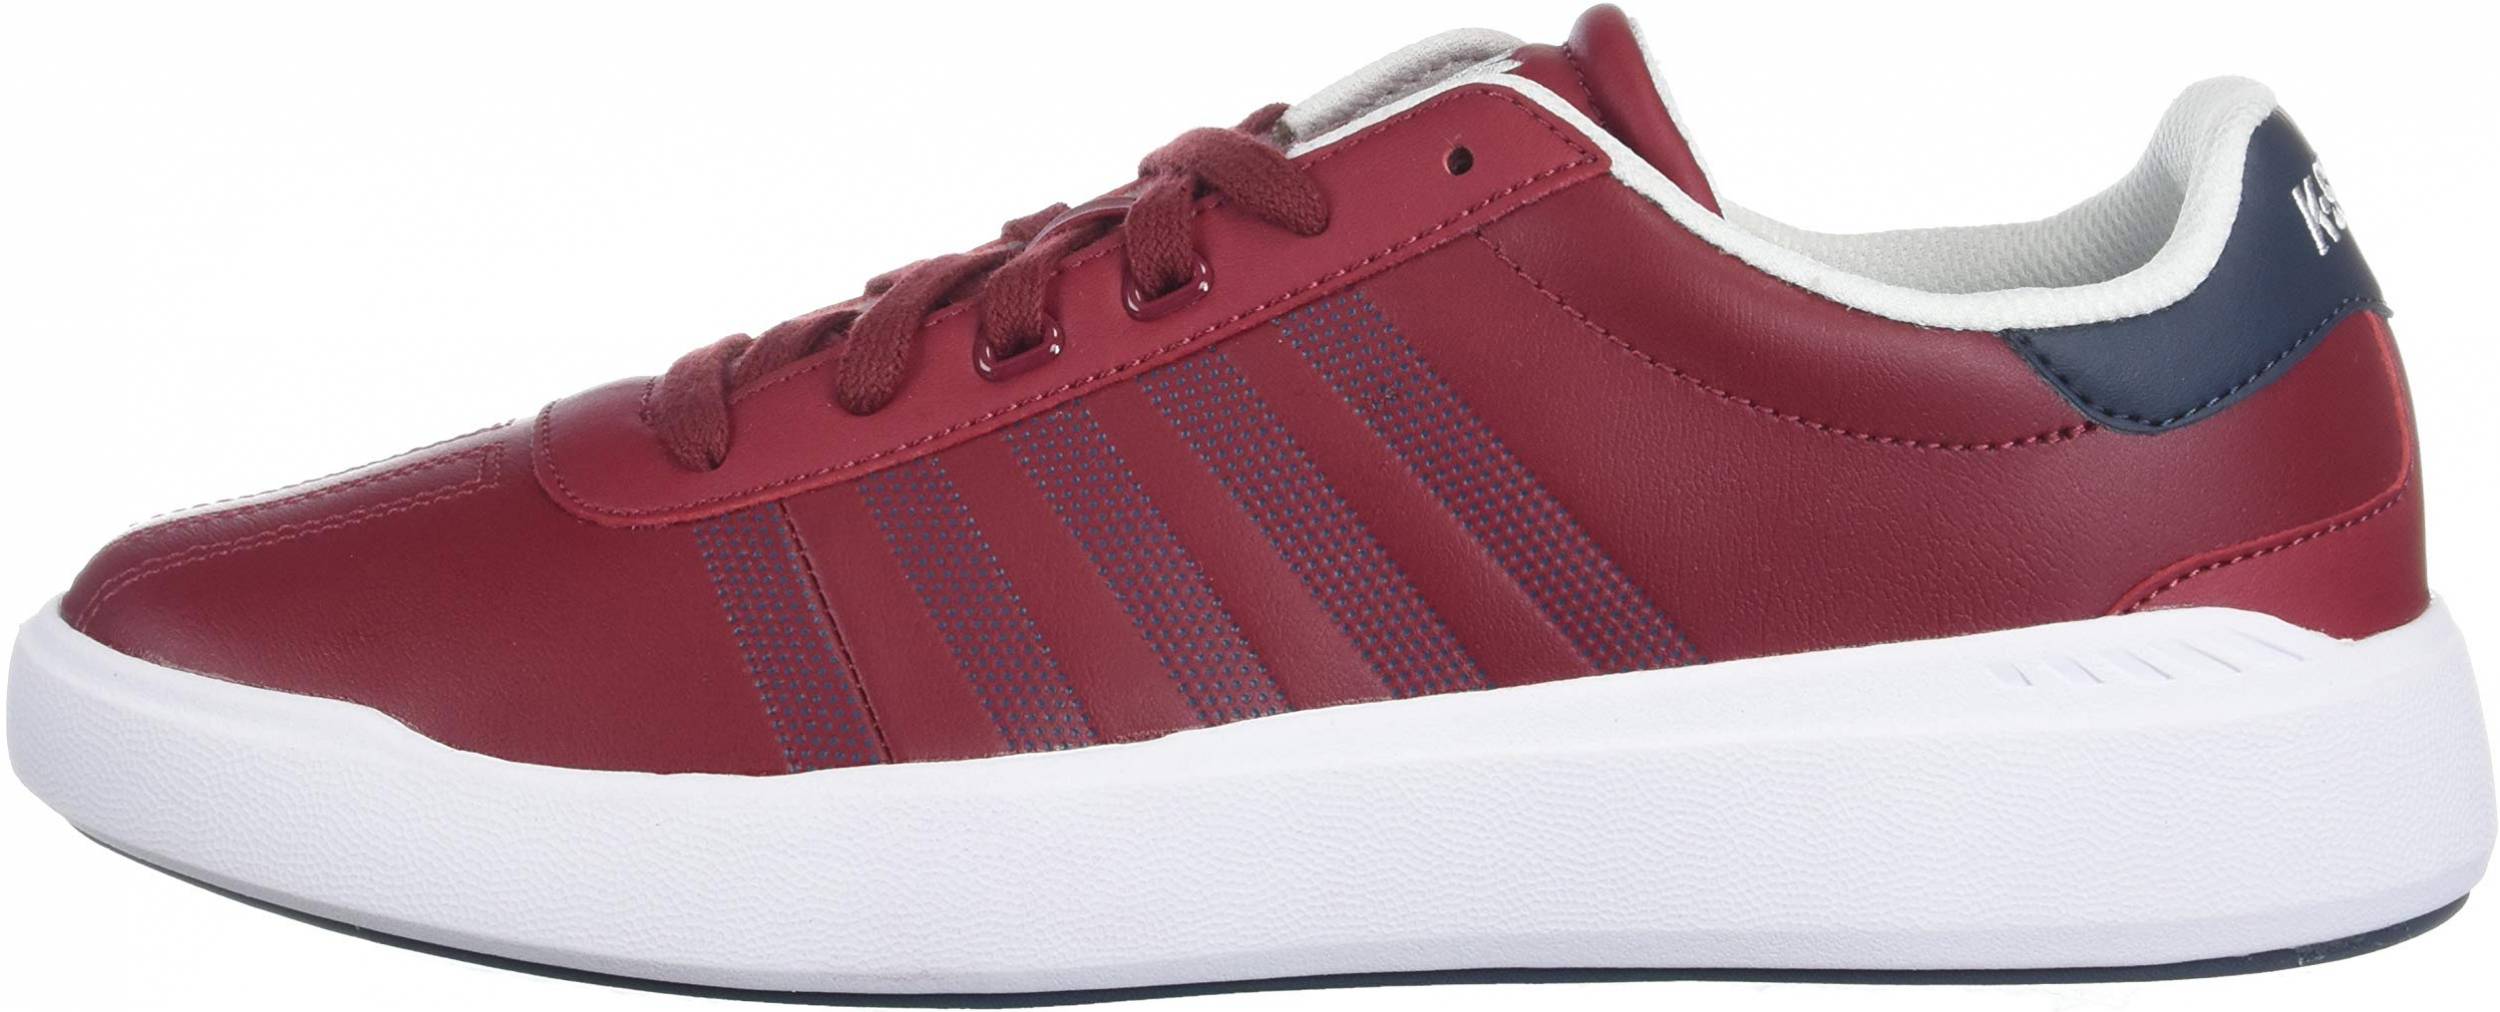 k swiss shoes red